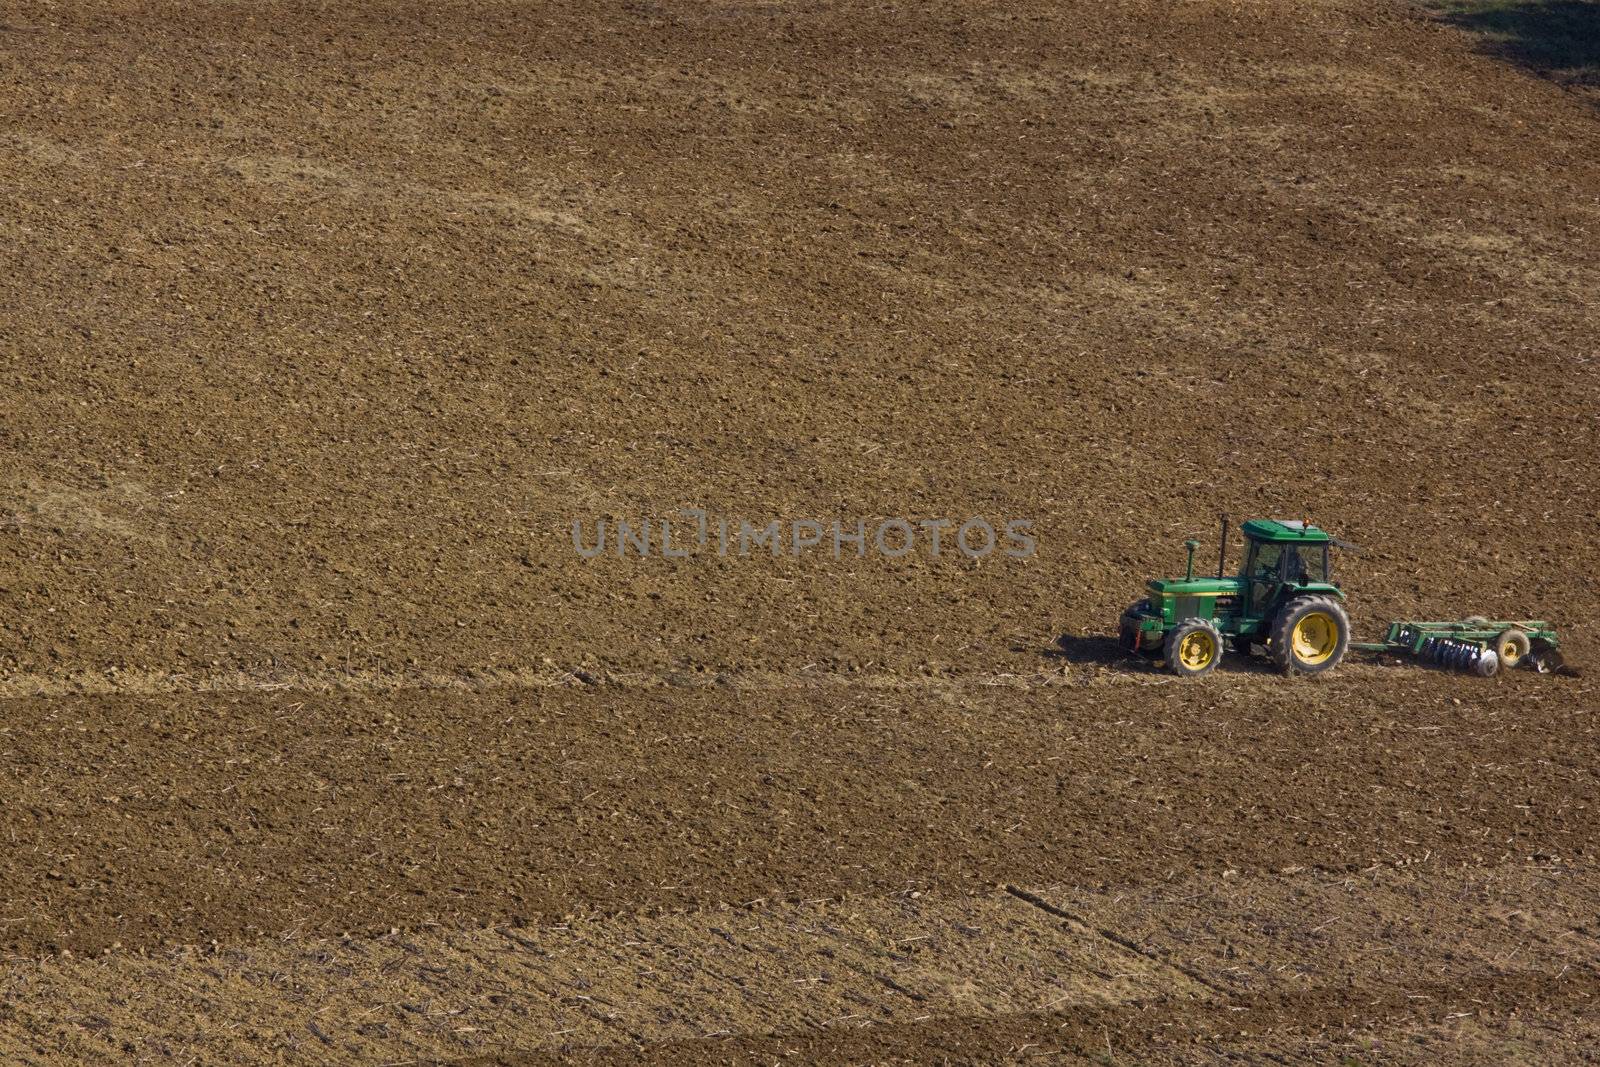 Land being turned at the end of the growing season in SW France